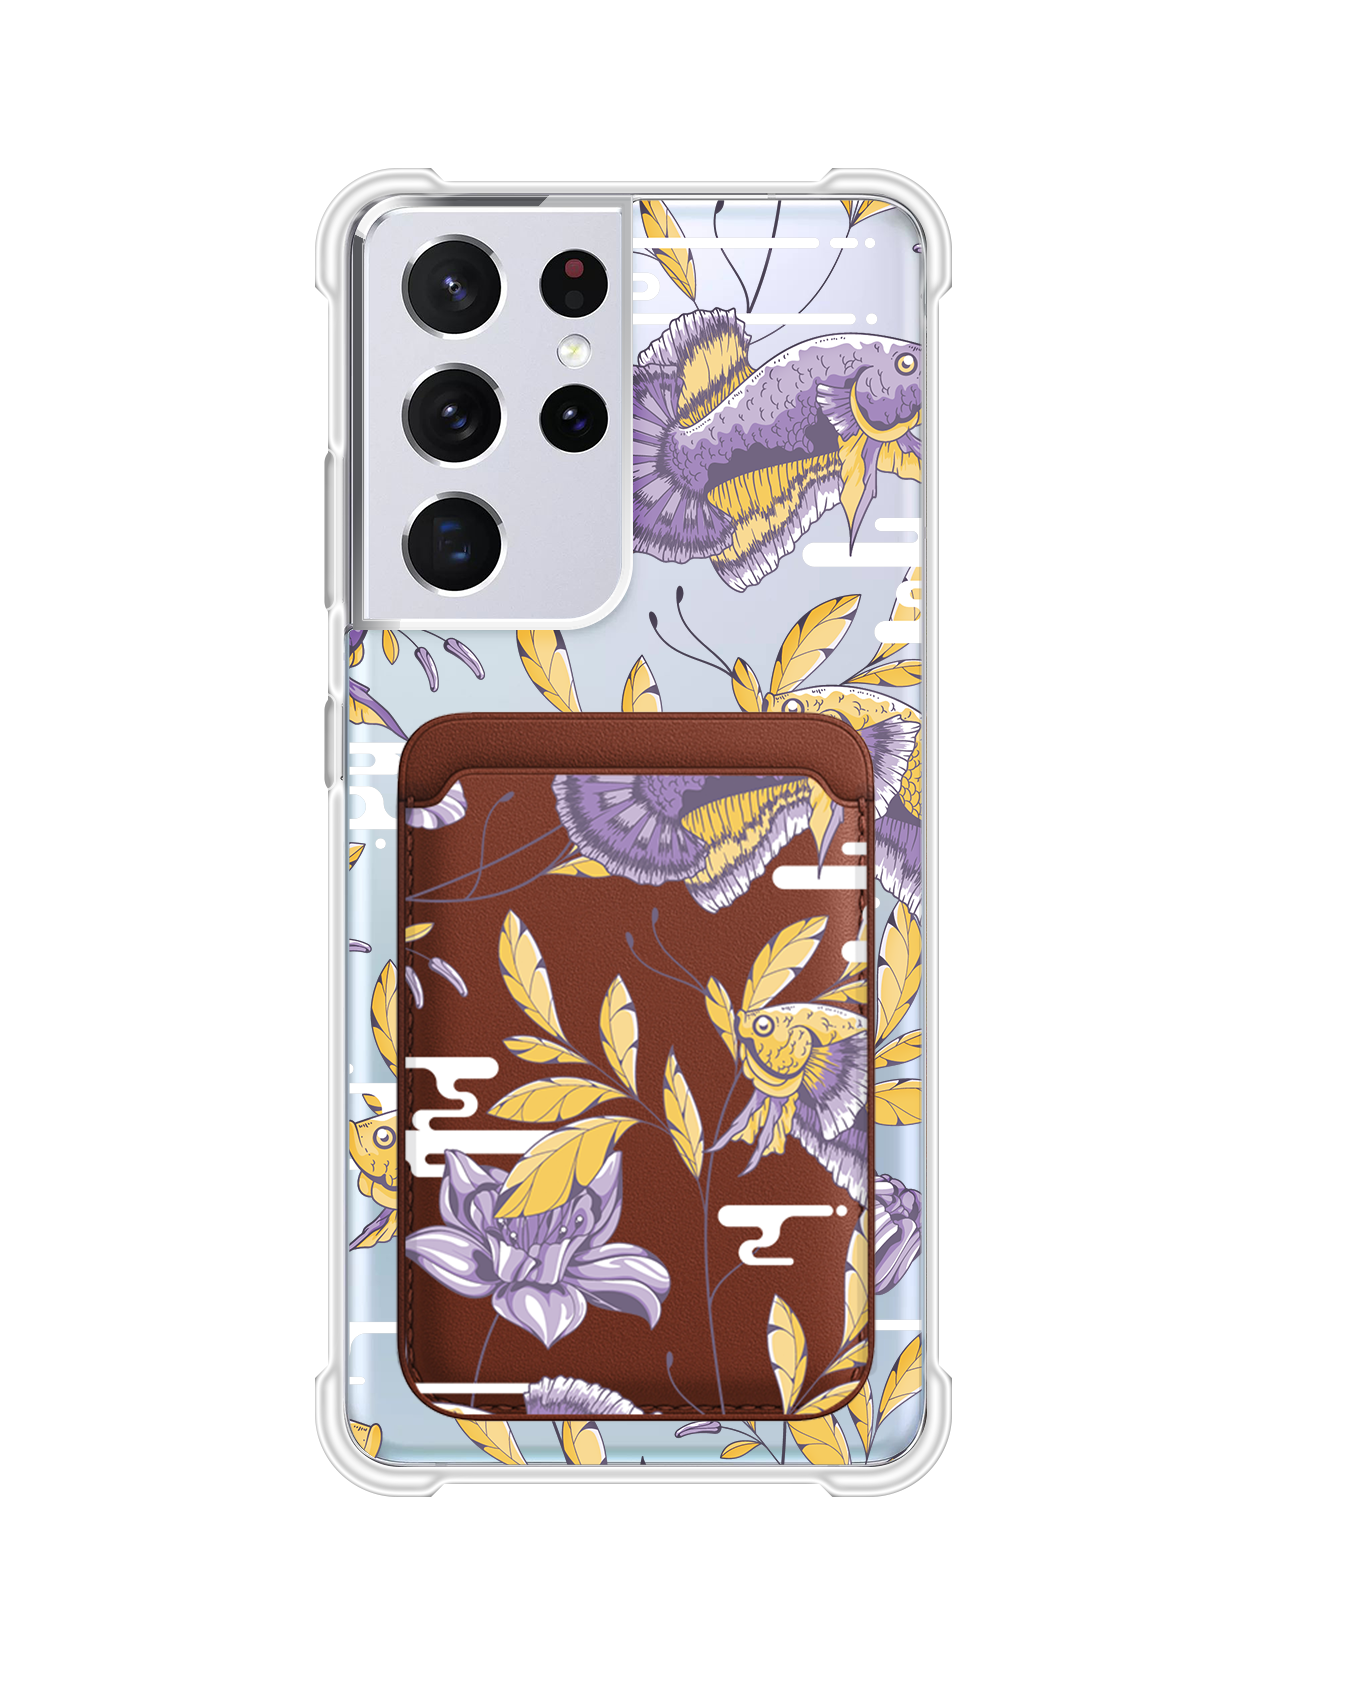 Android Magnetic Wallet Case - Fish & Floral 5.0